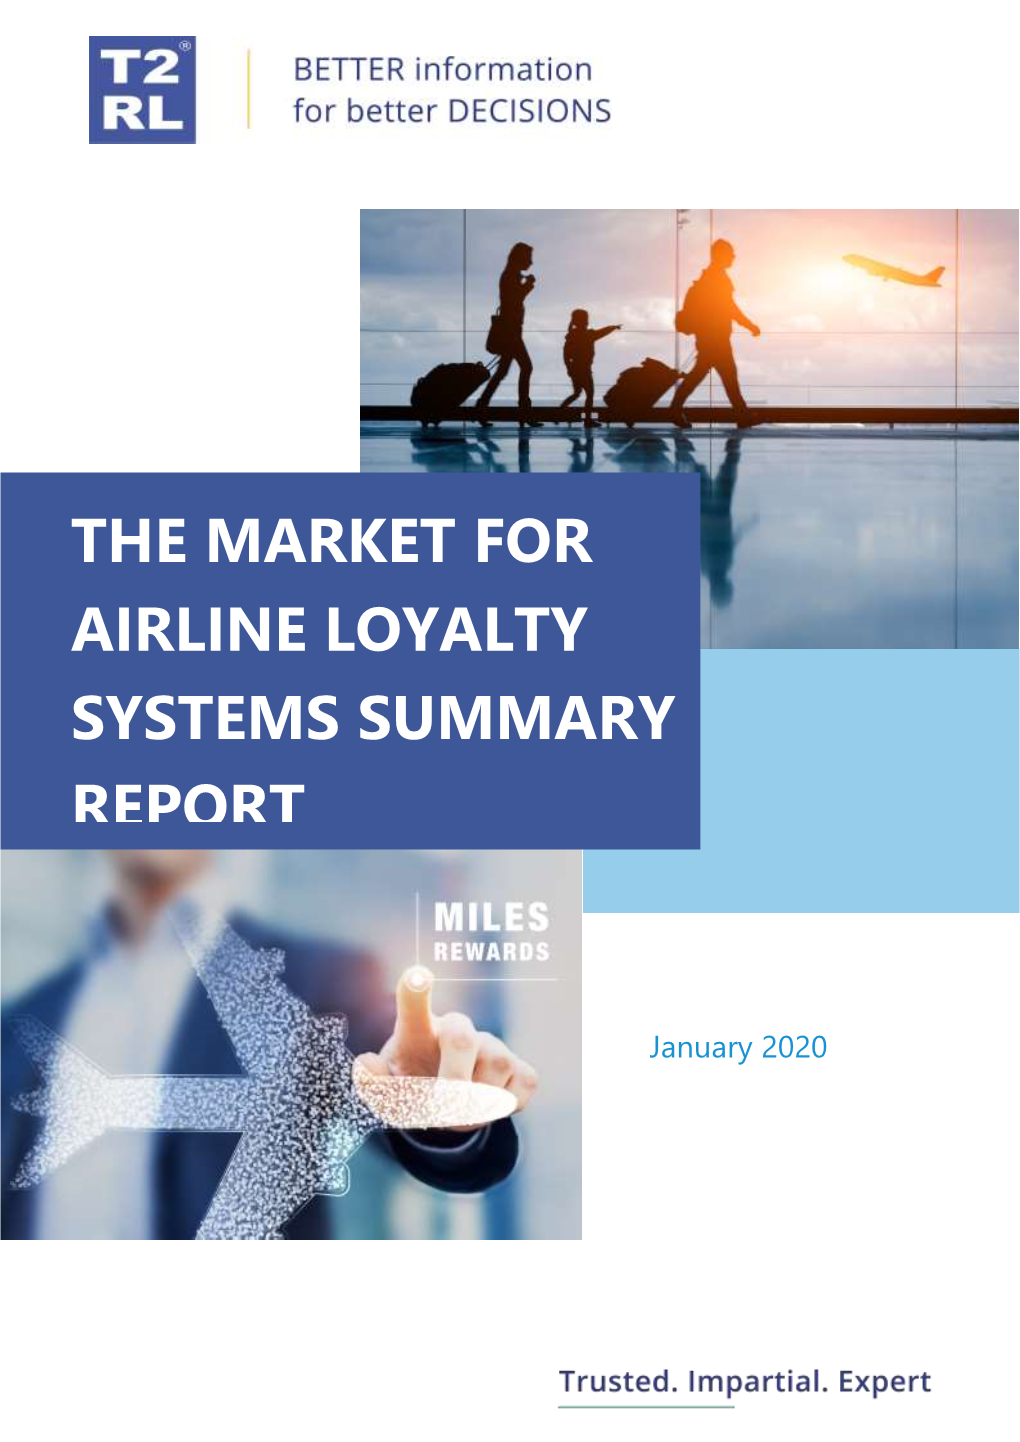 The Market for Airline Loyalty Systems Summary Report